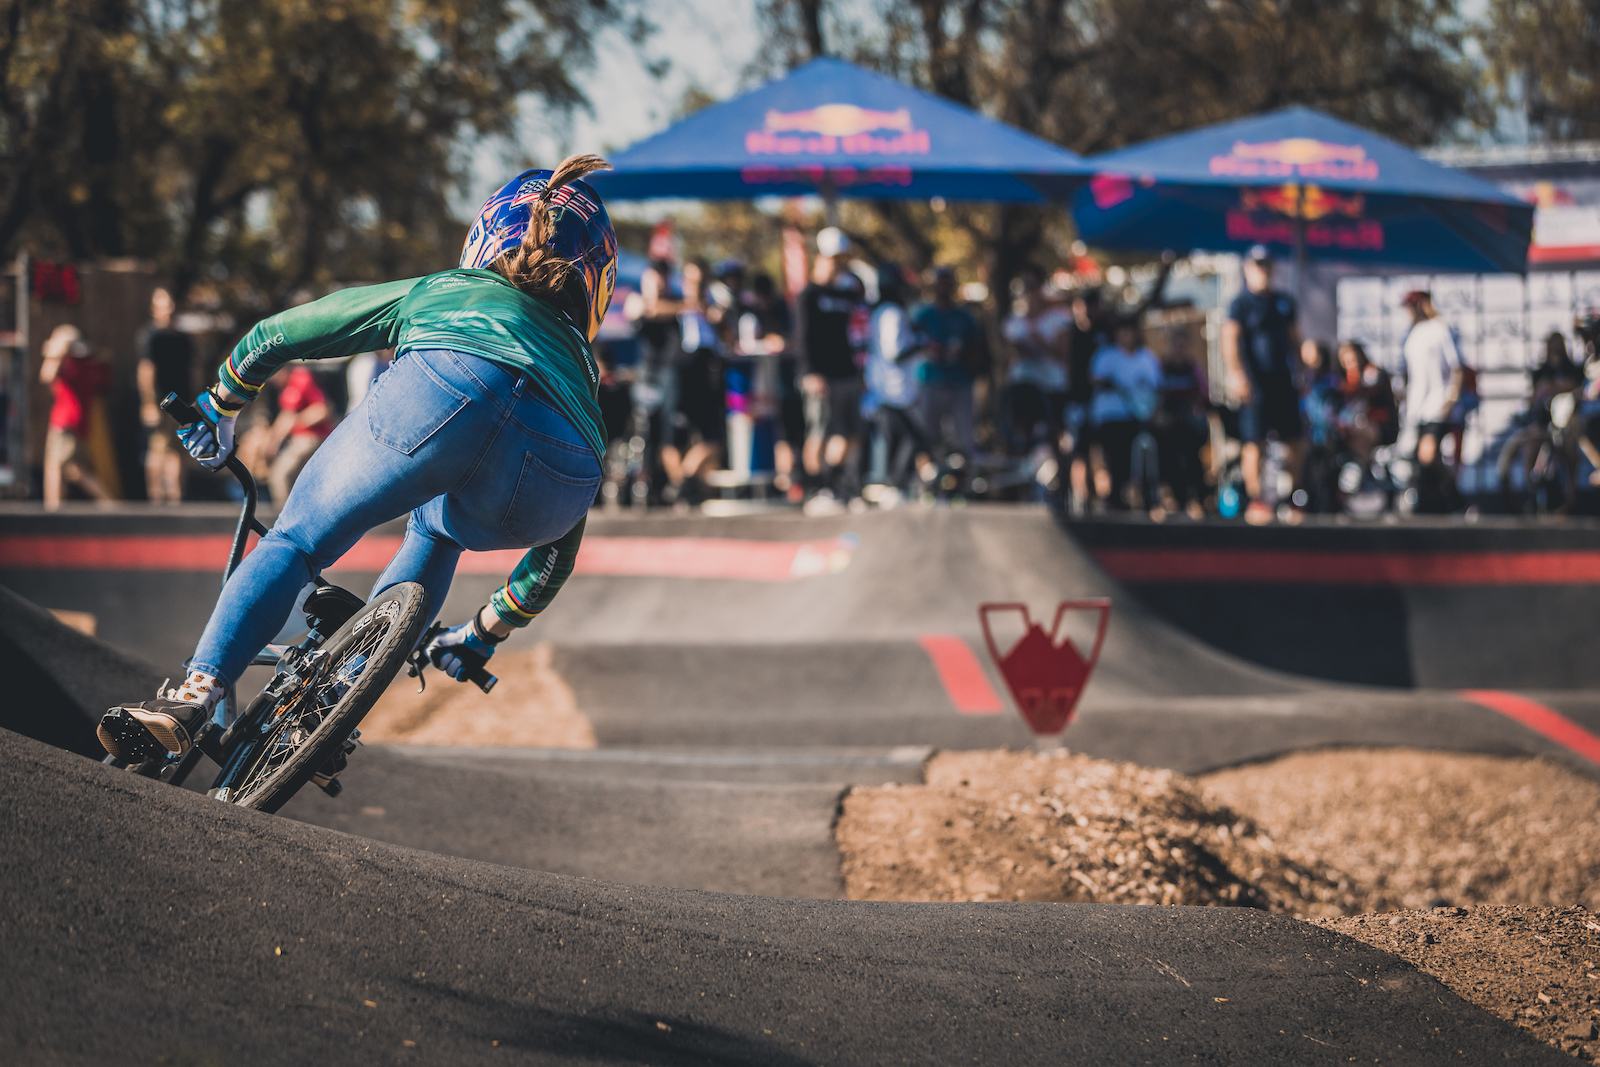 The series brings competitors from every corner of the globe and this year s final saw riders from 21 countries and 5 continents. Payton Ridenour travelled down from the USA after claiming her ticket at the Texas qualifier in July.